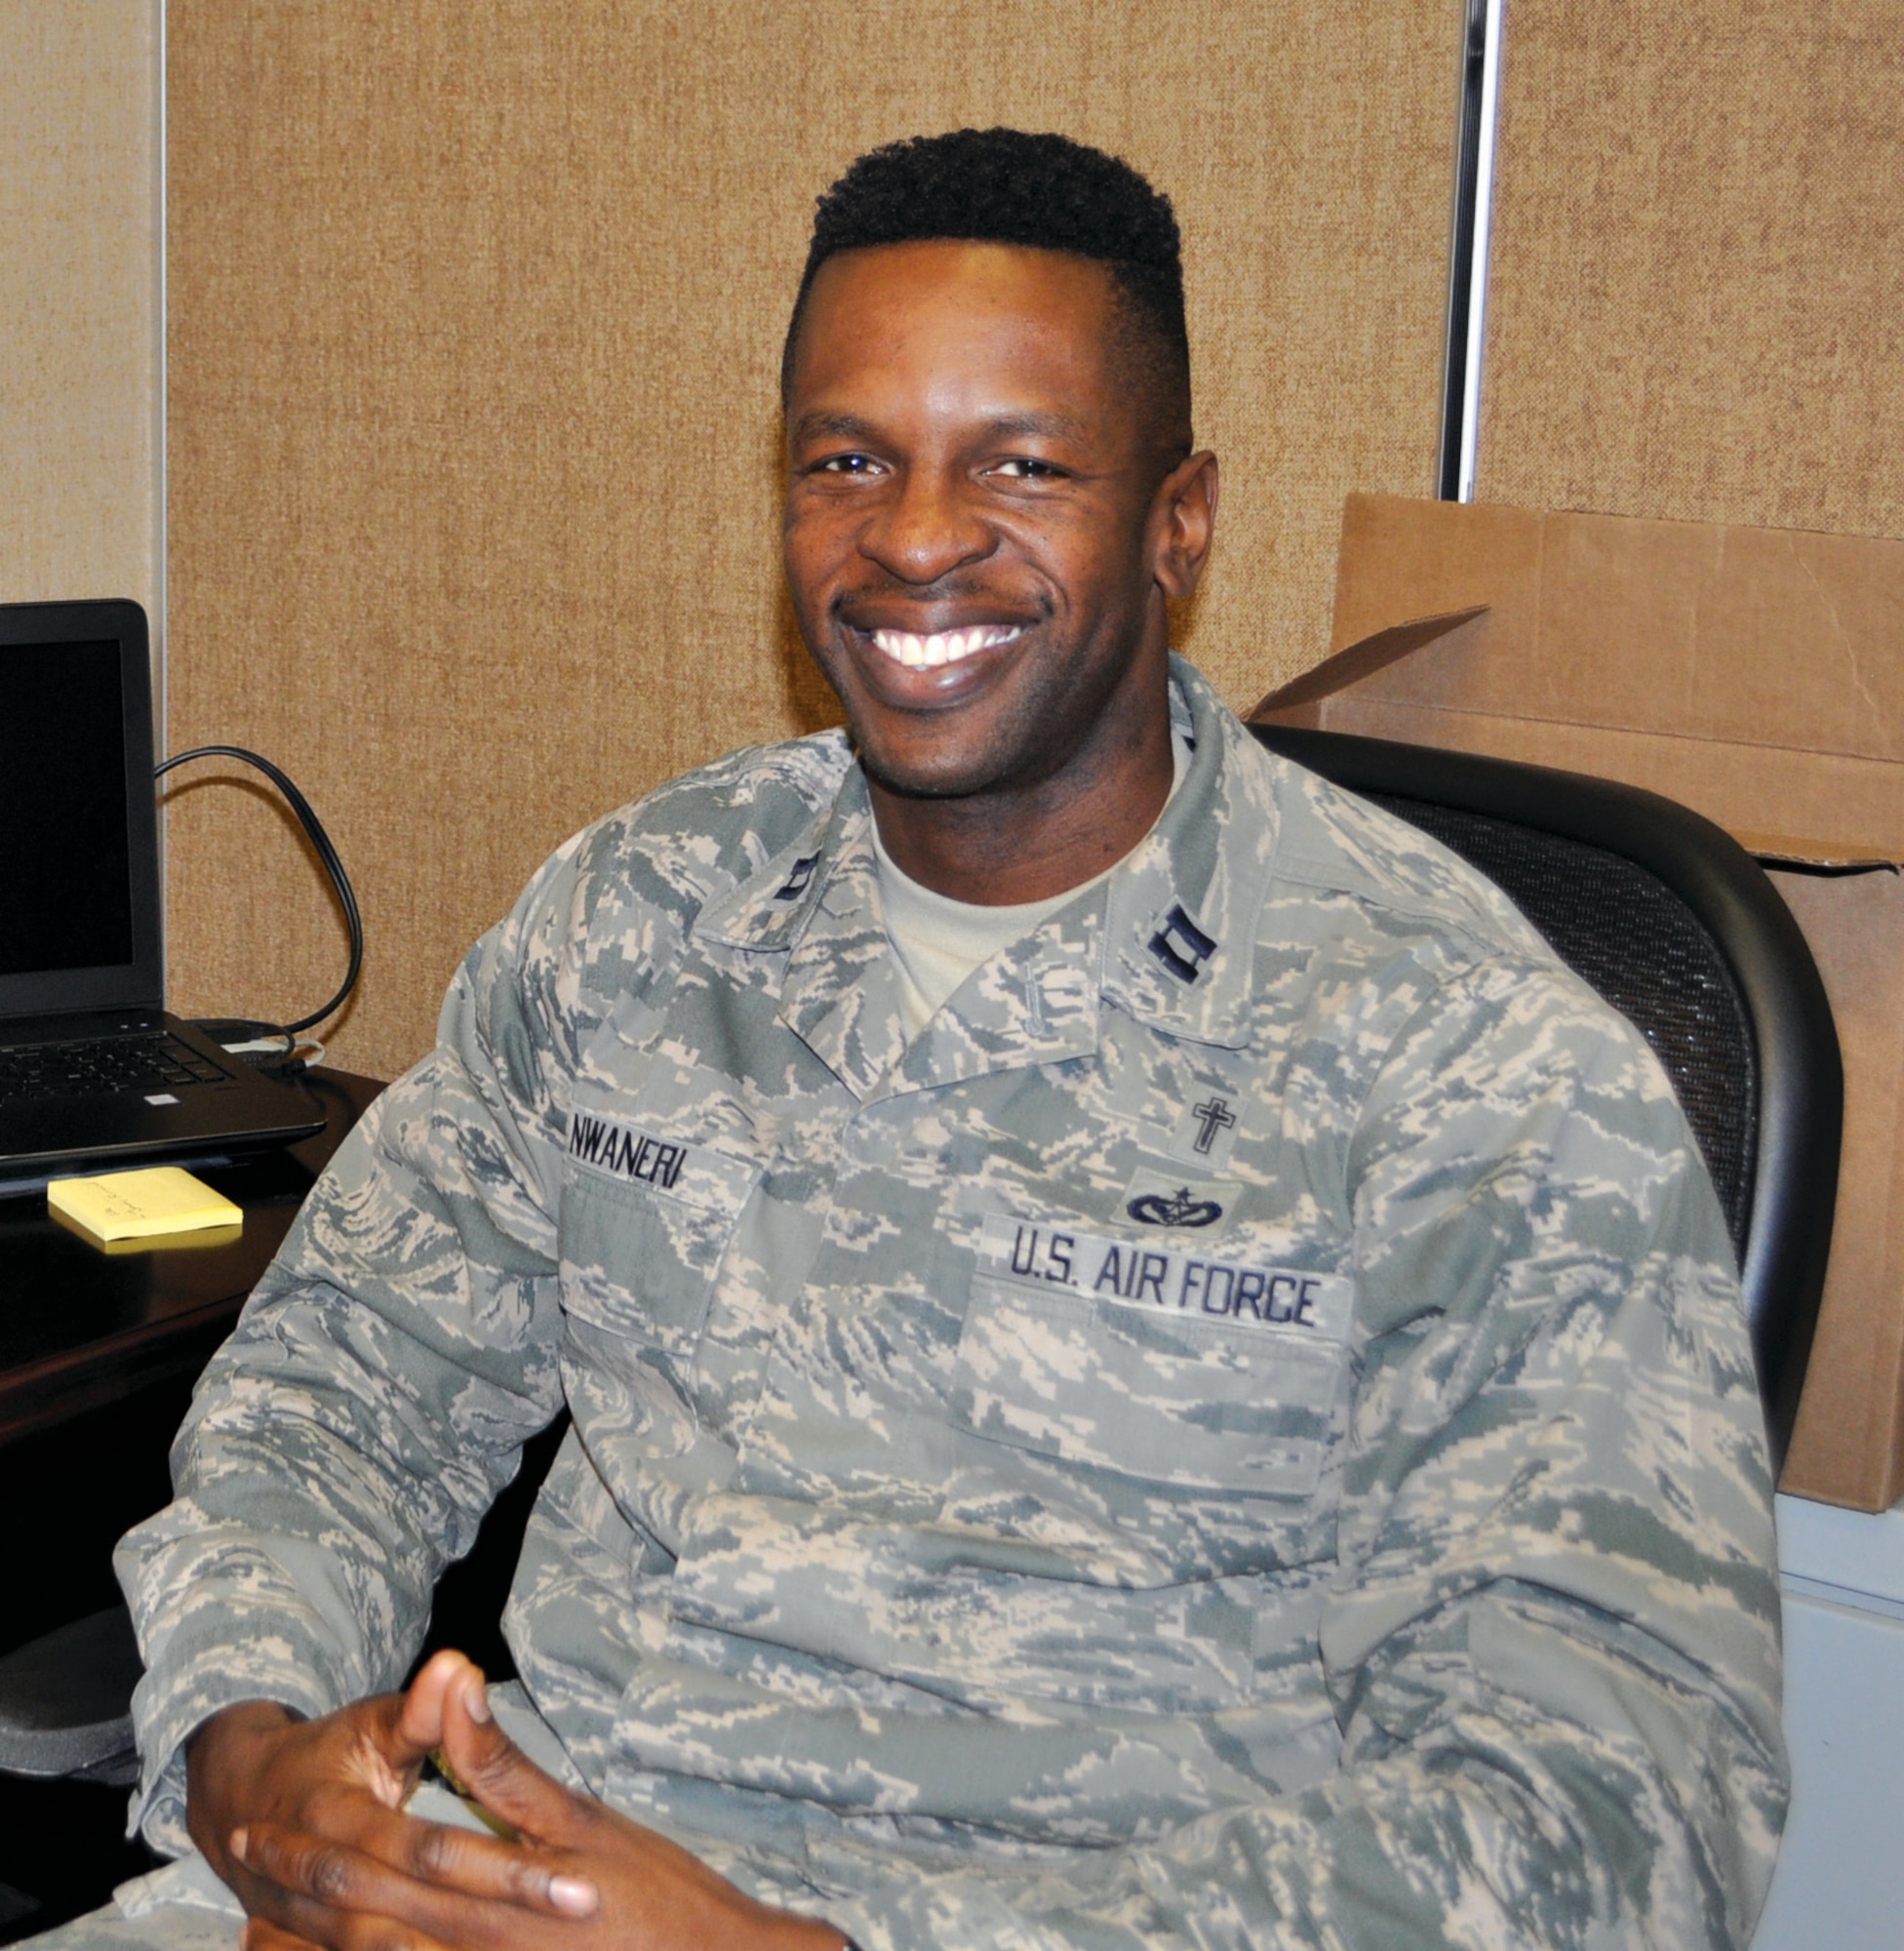 Chaplain (Capt.) Okechukwu Nwaneri serves as the group chaplain for the 72nd Mission Support Group and 552nd Maintenance Group.